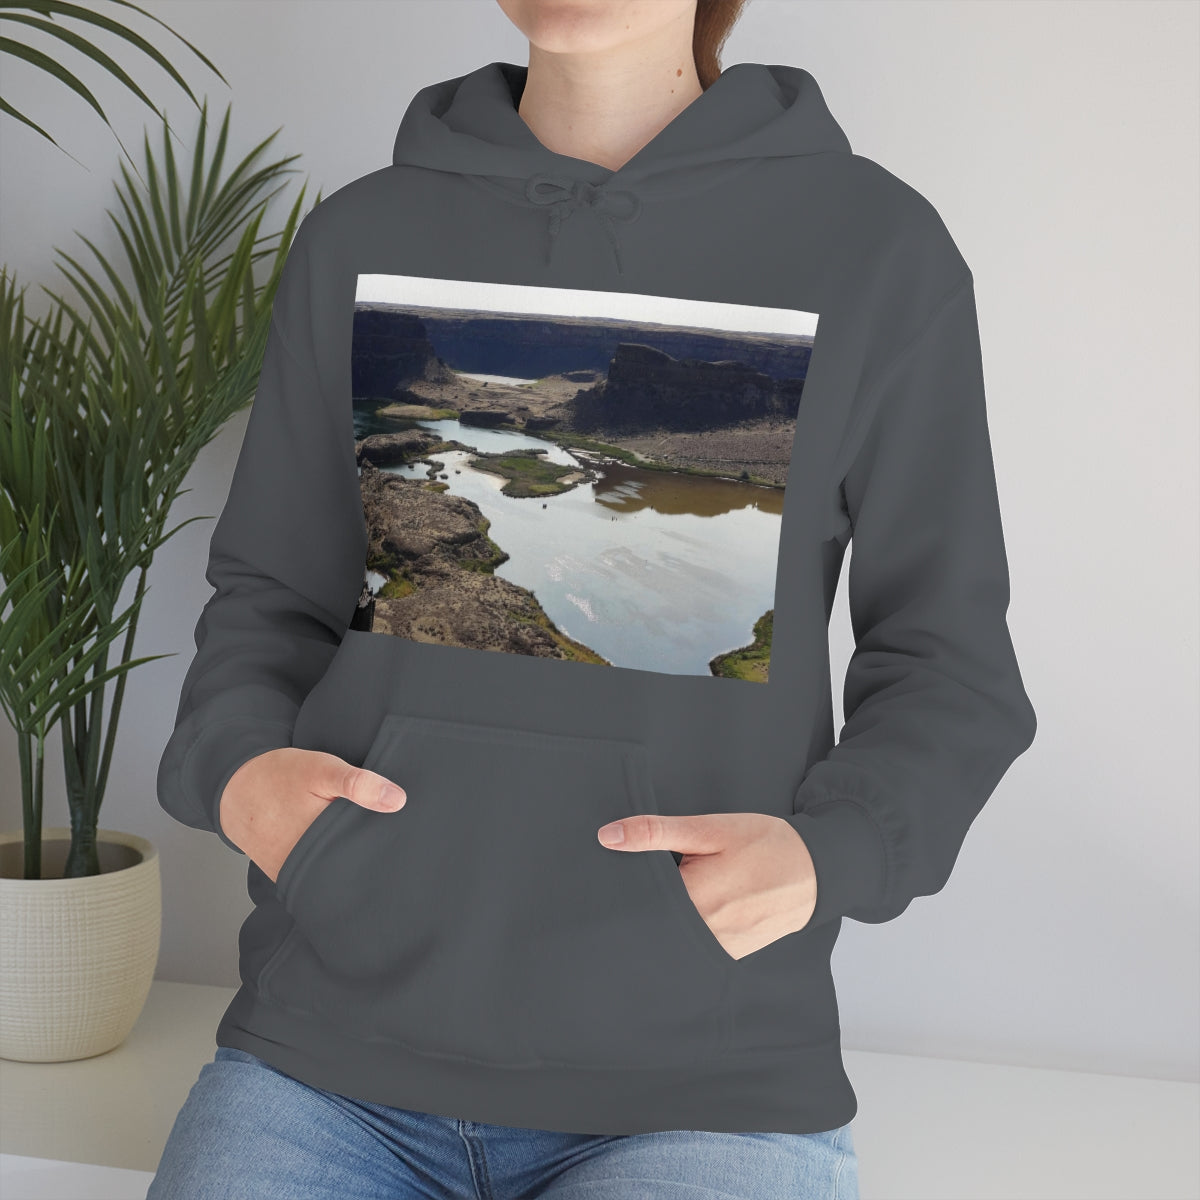 Reminisce of Ancient Thunder - Unisex Heavy Blend Hooded Sweatshirt - Fry1Productions